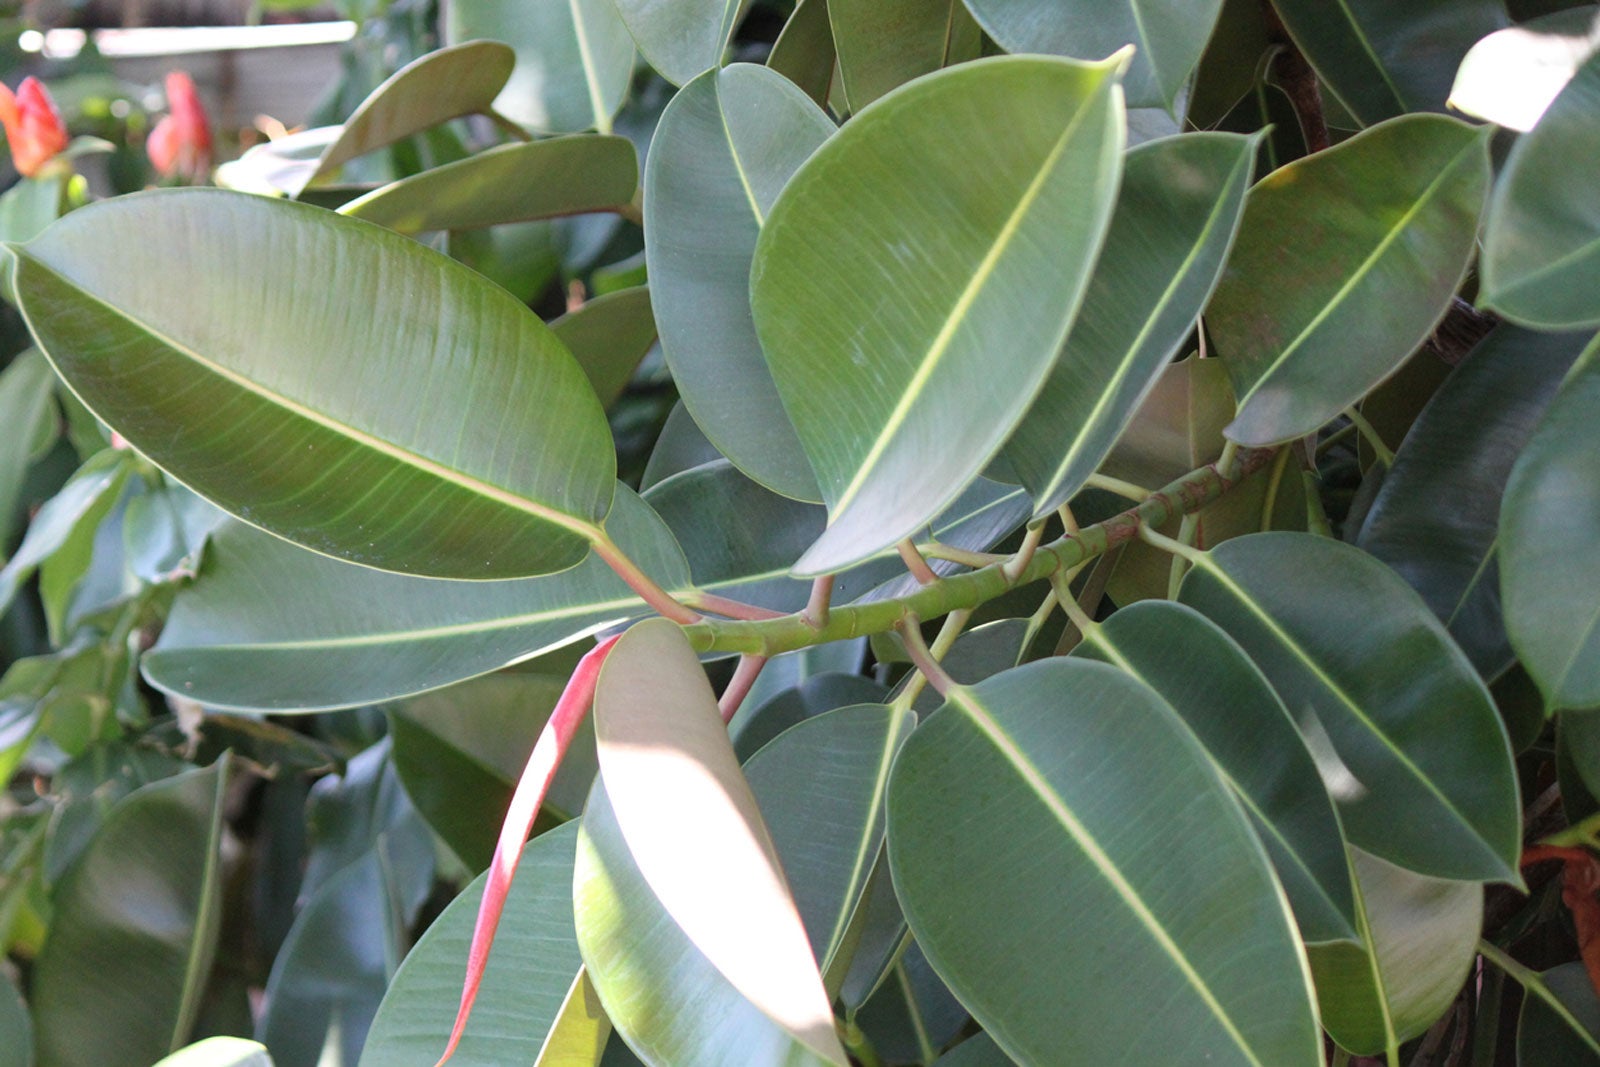 Outdoor Rubber Tree Plants - Can You Grow Rubber Plants Outside